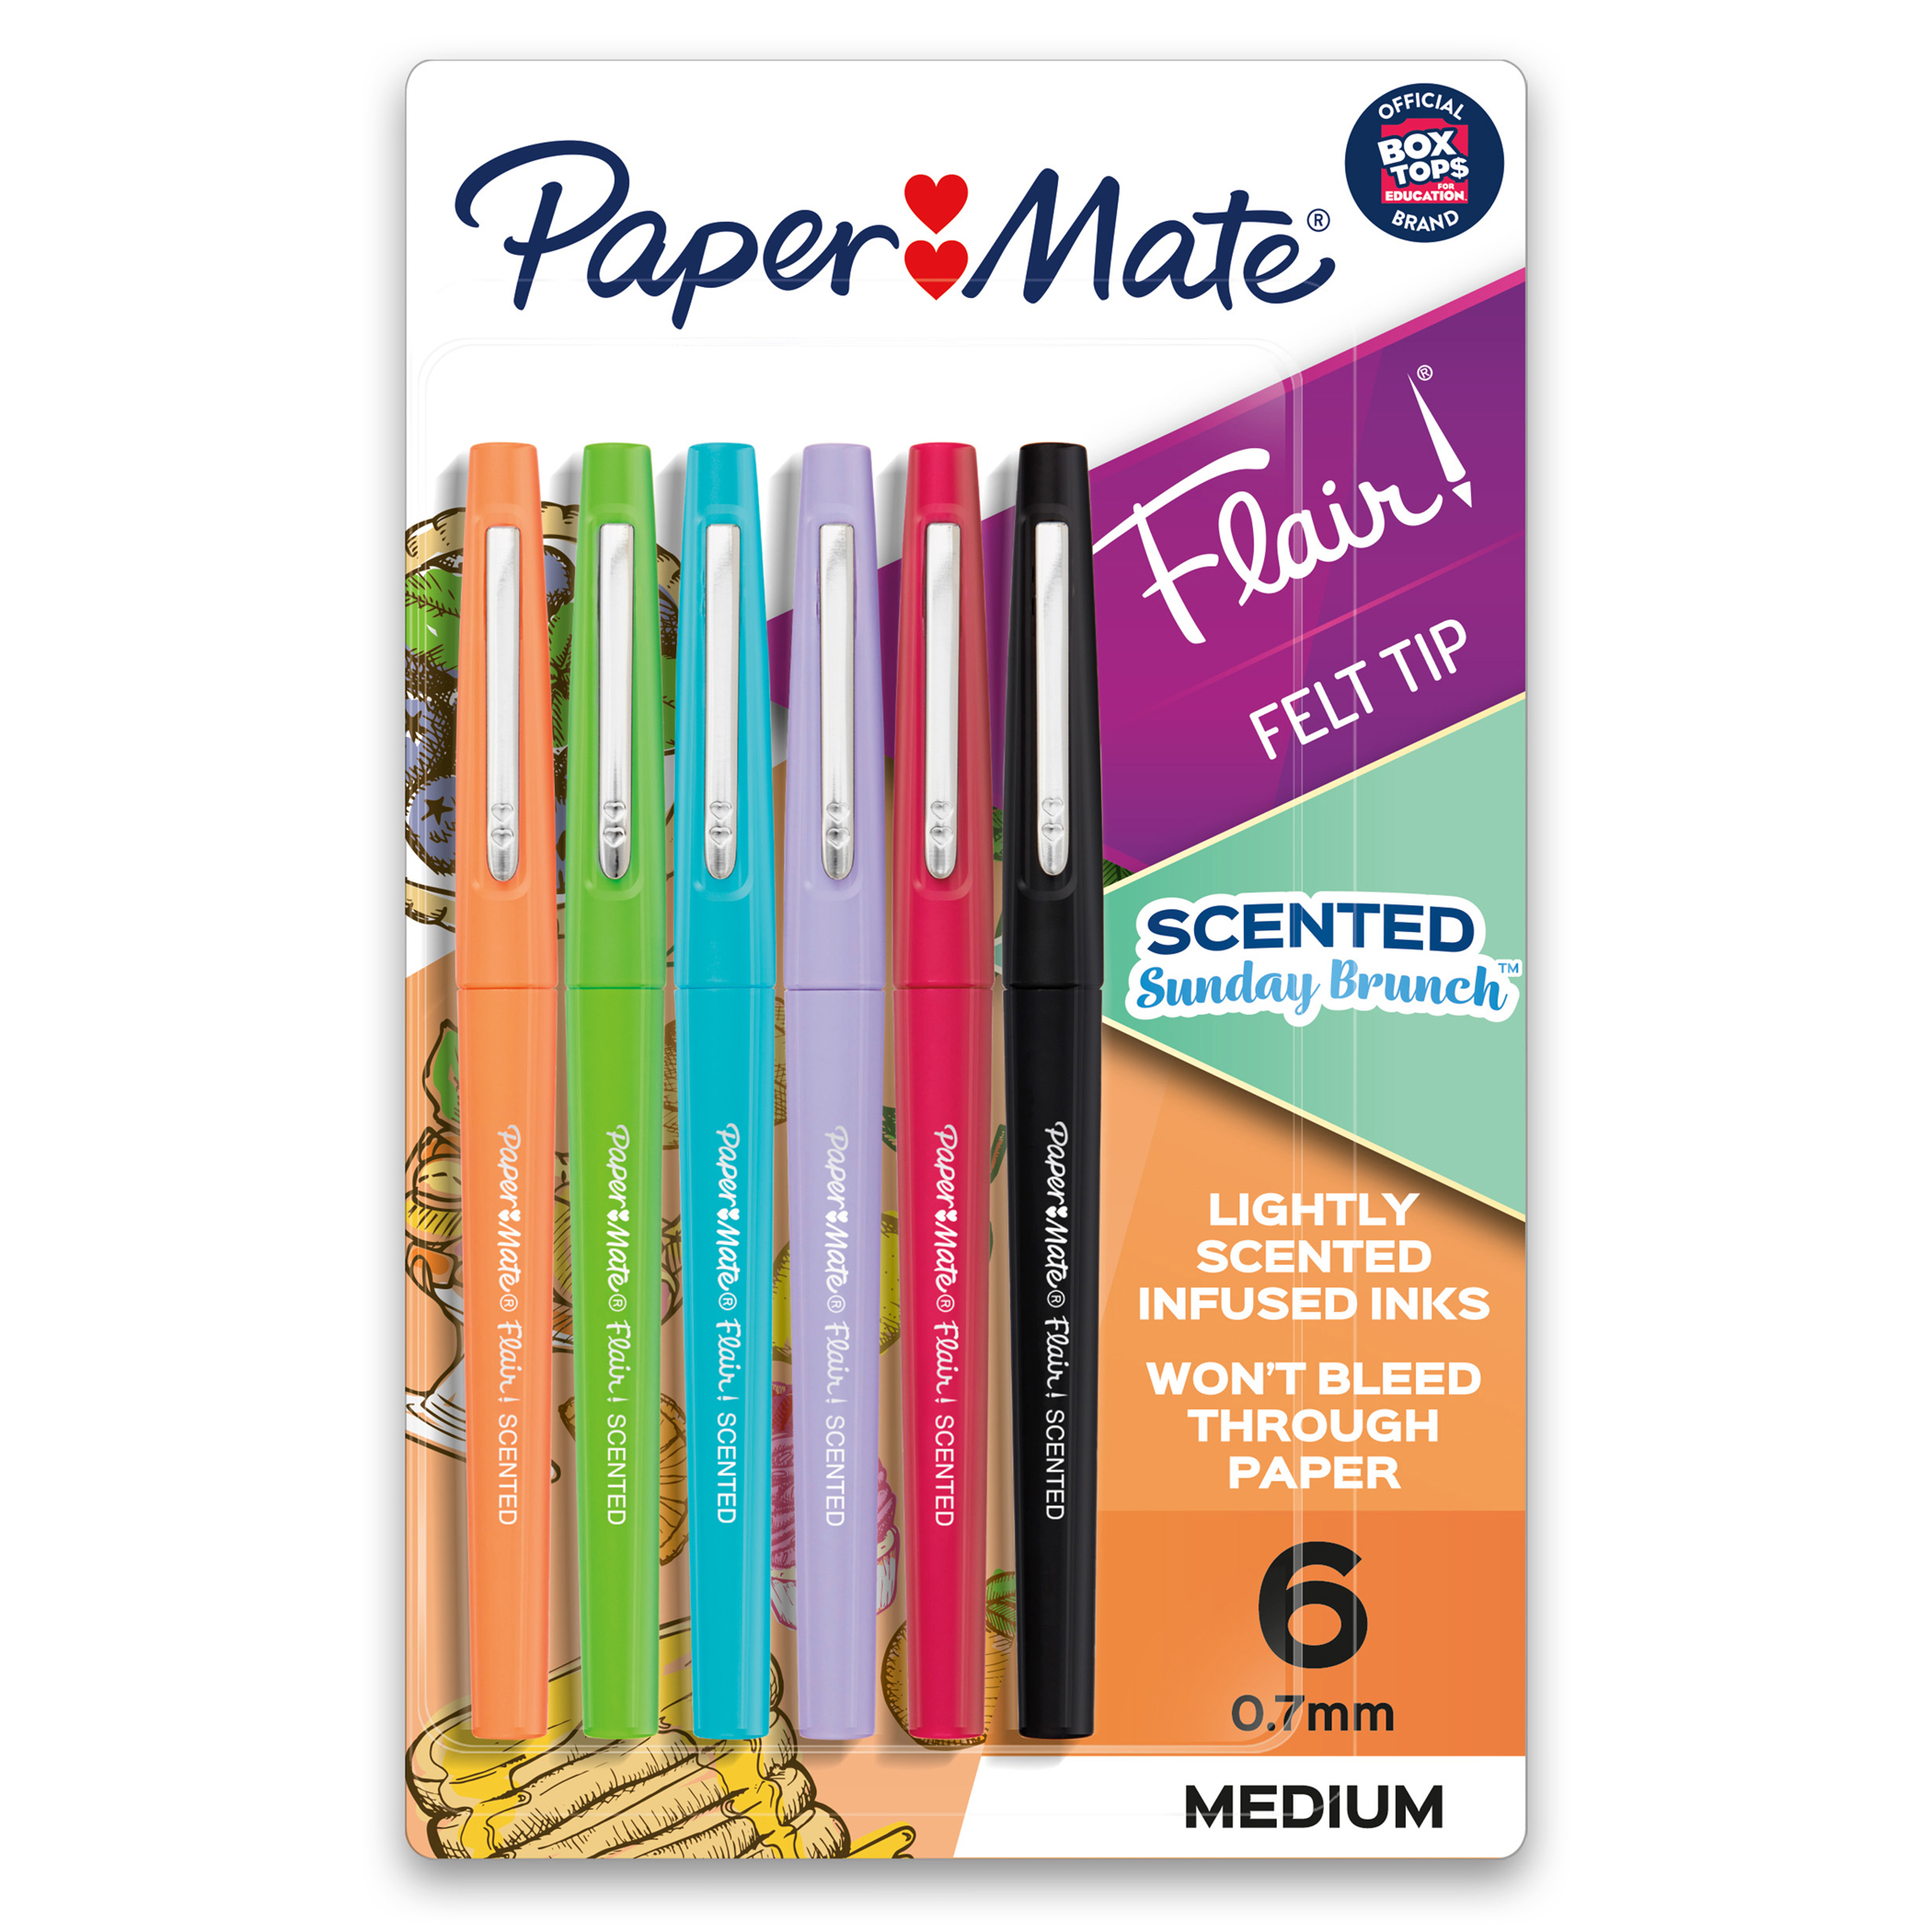 The Teachers' Lounge®  Flair, Scented Felt Tip Pens, Assorted Sunday  Brunch Scents & Colors, 0.7mm, 6 Per Pack, 2 Packs